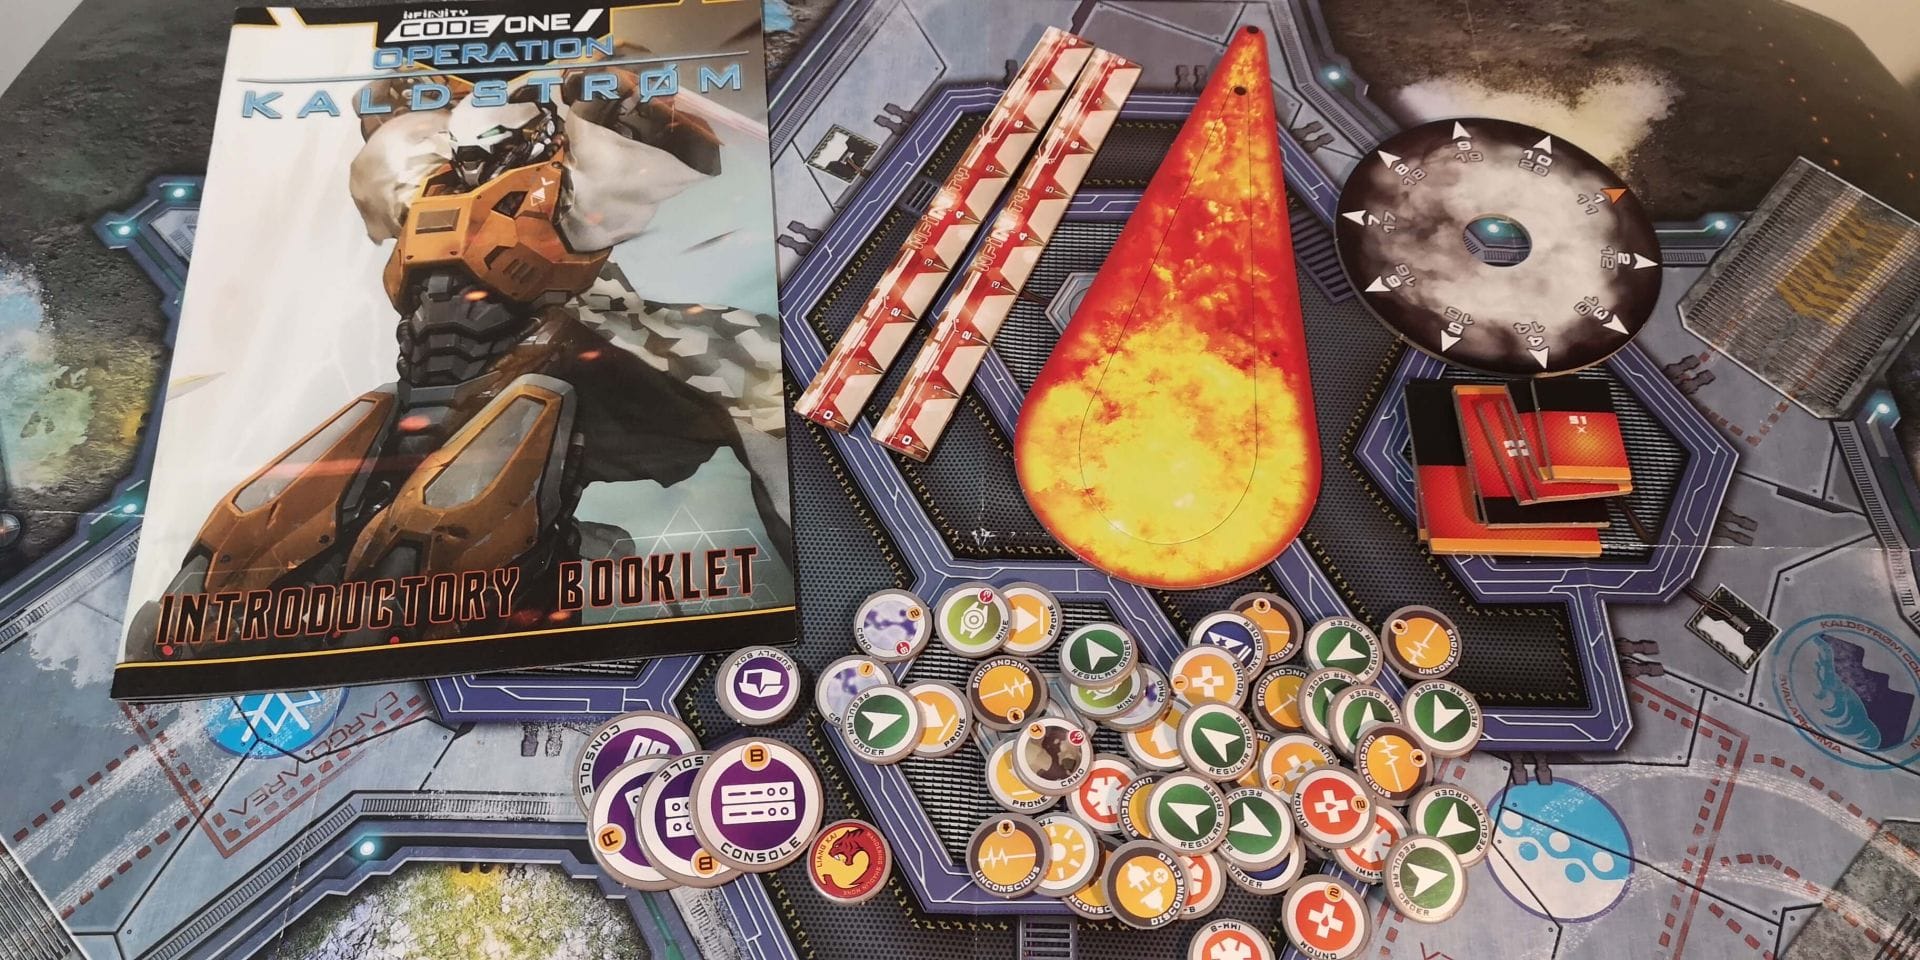 Infinity CodeOne Operation Kaldstrom dice and tokens.